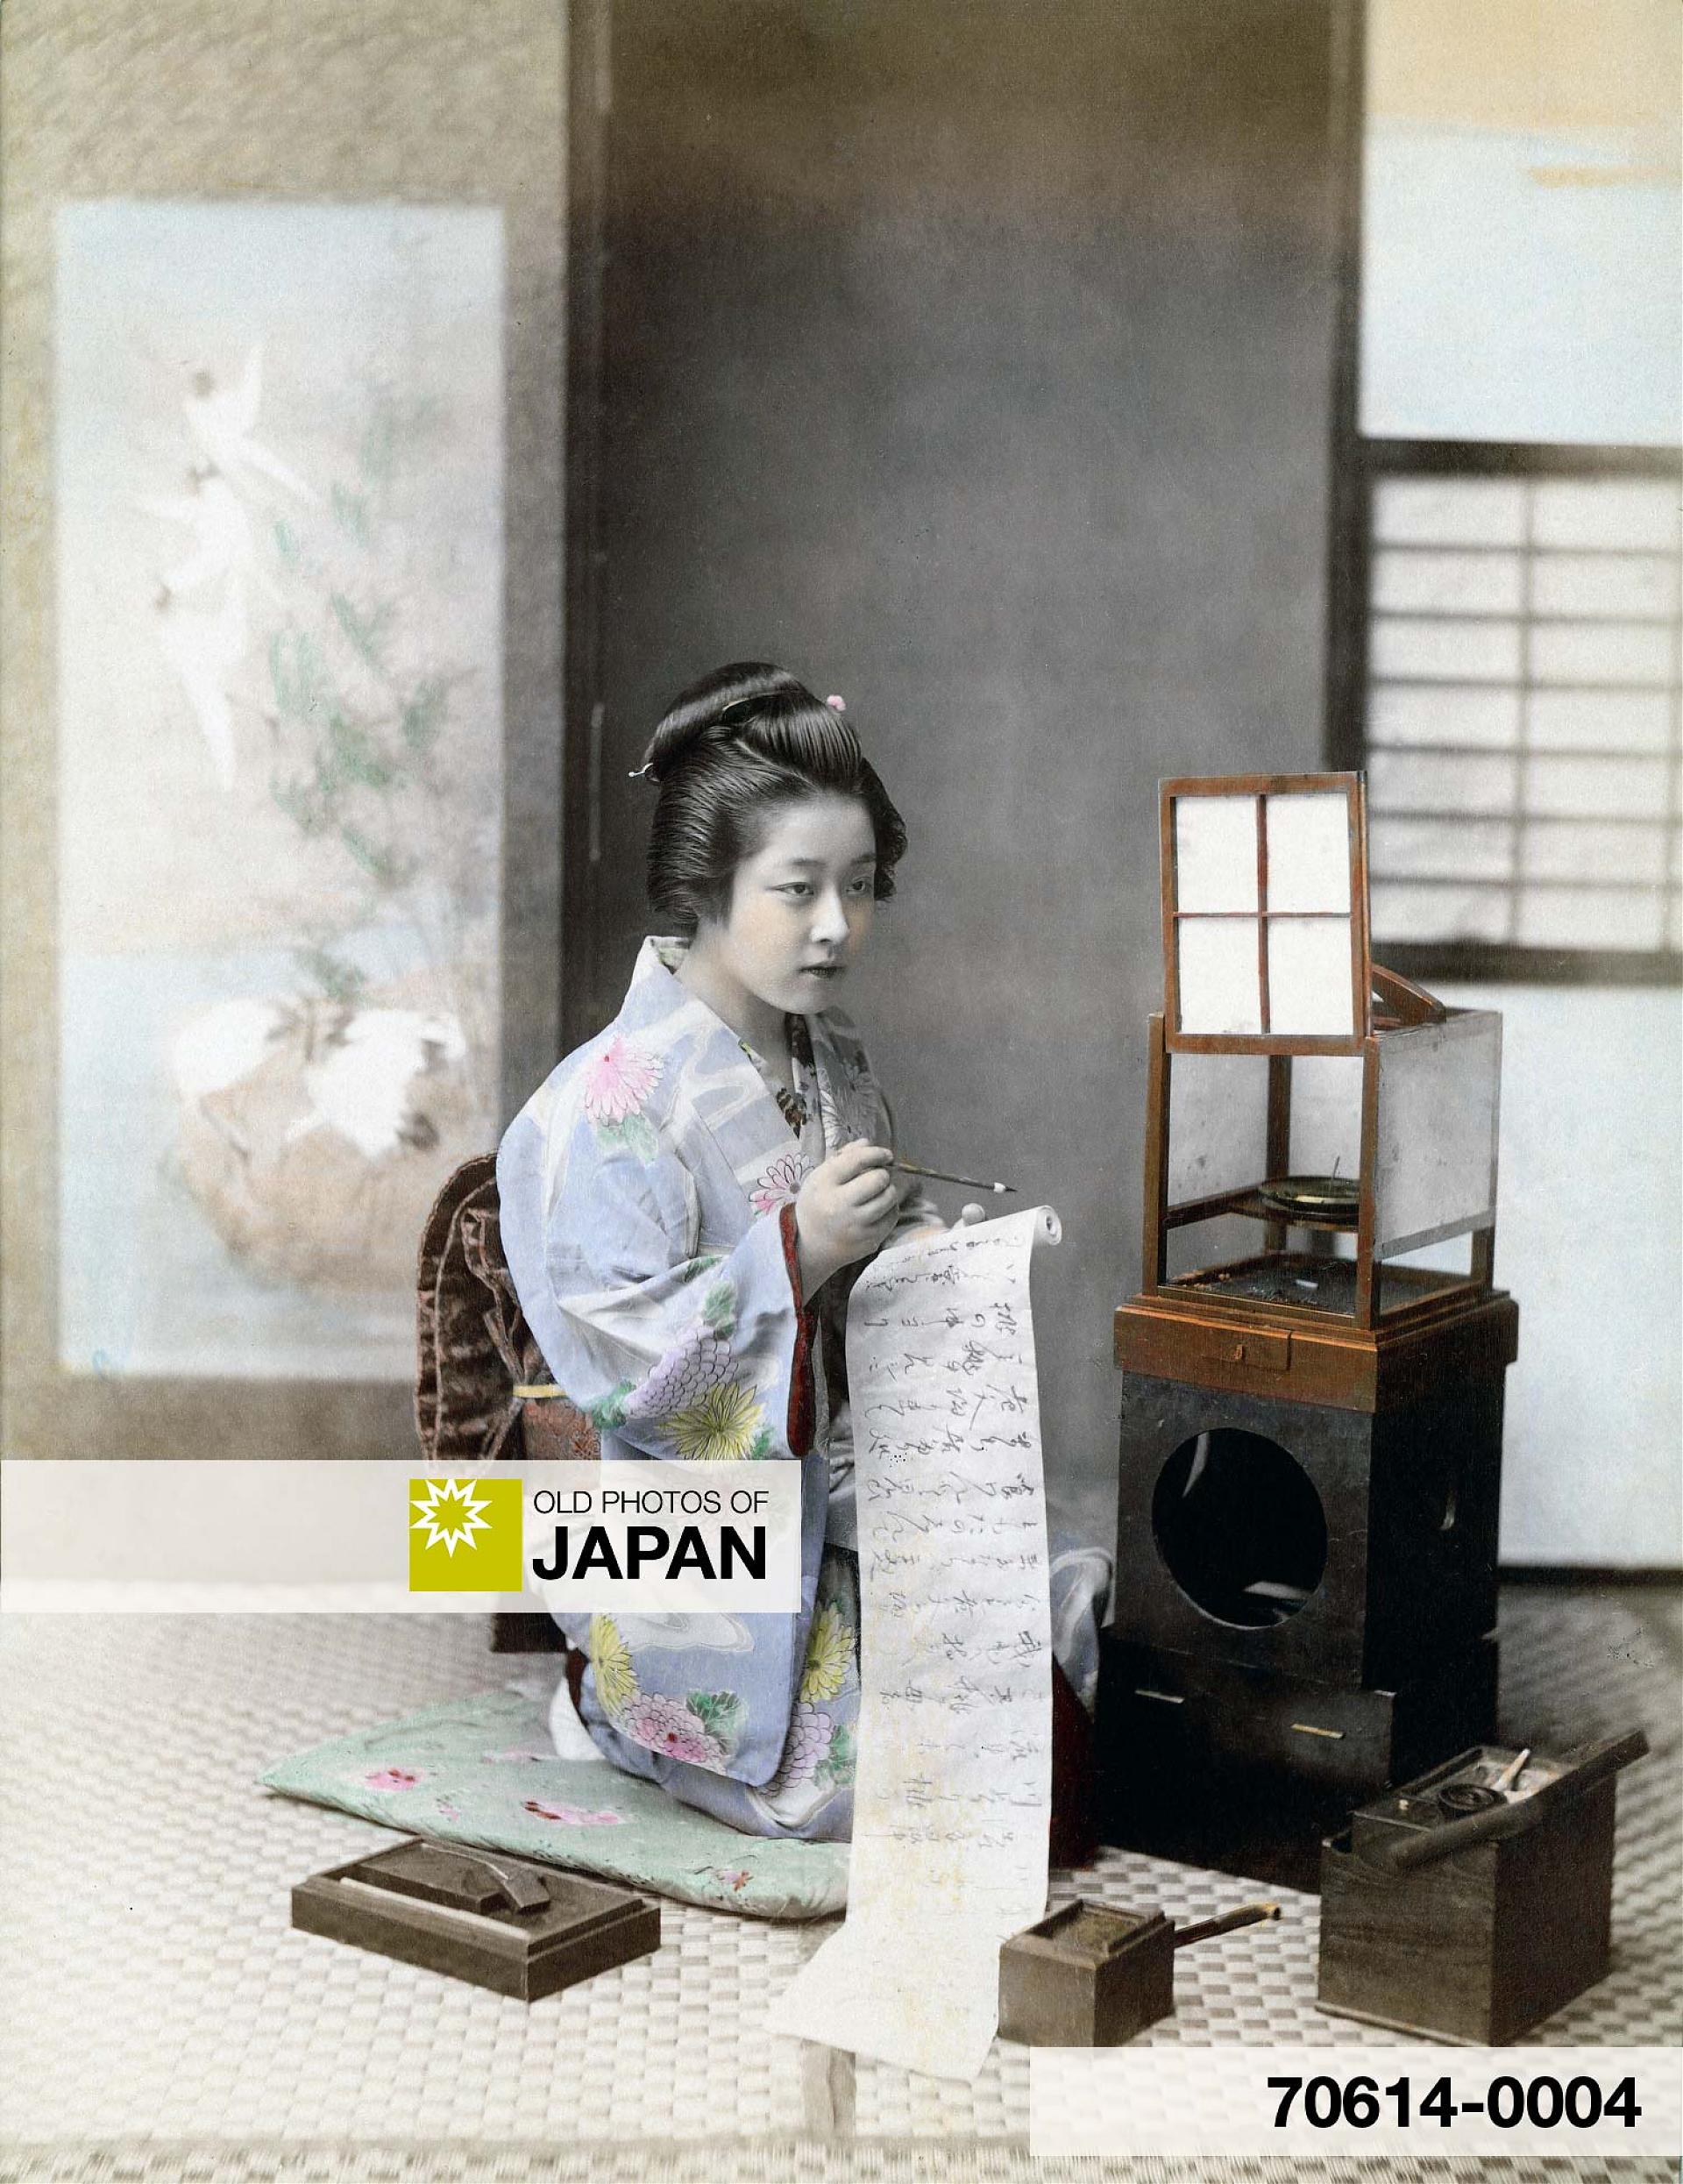 70614-0004 - Japanese Woman in Kimono Writing a Letter, 1890s